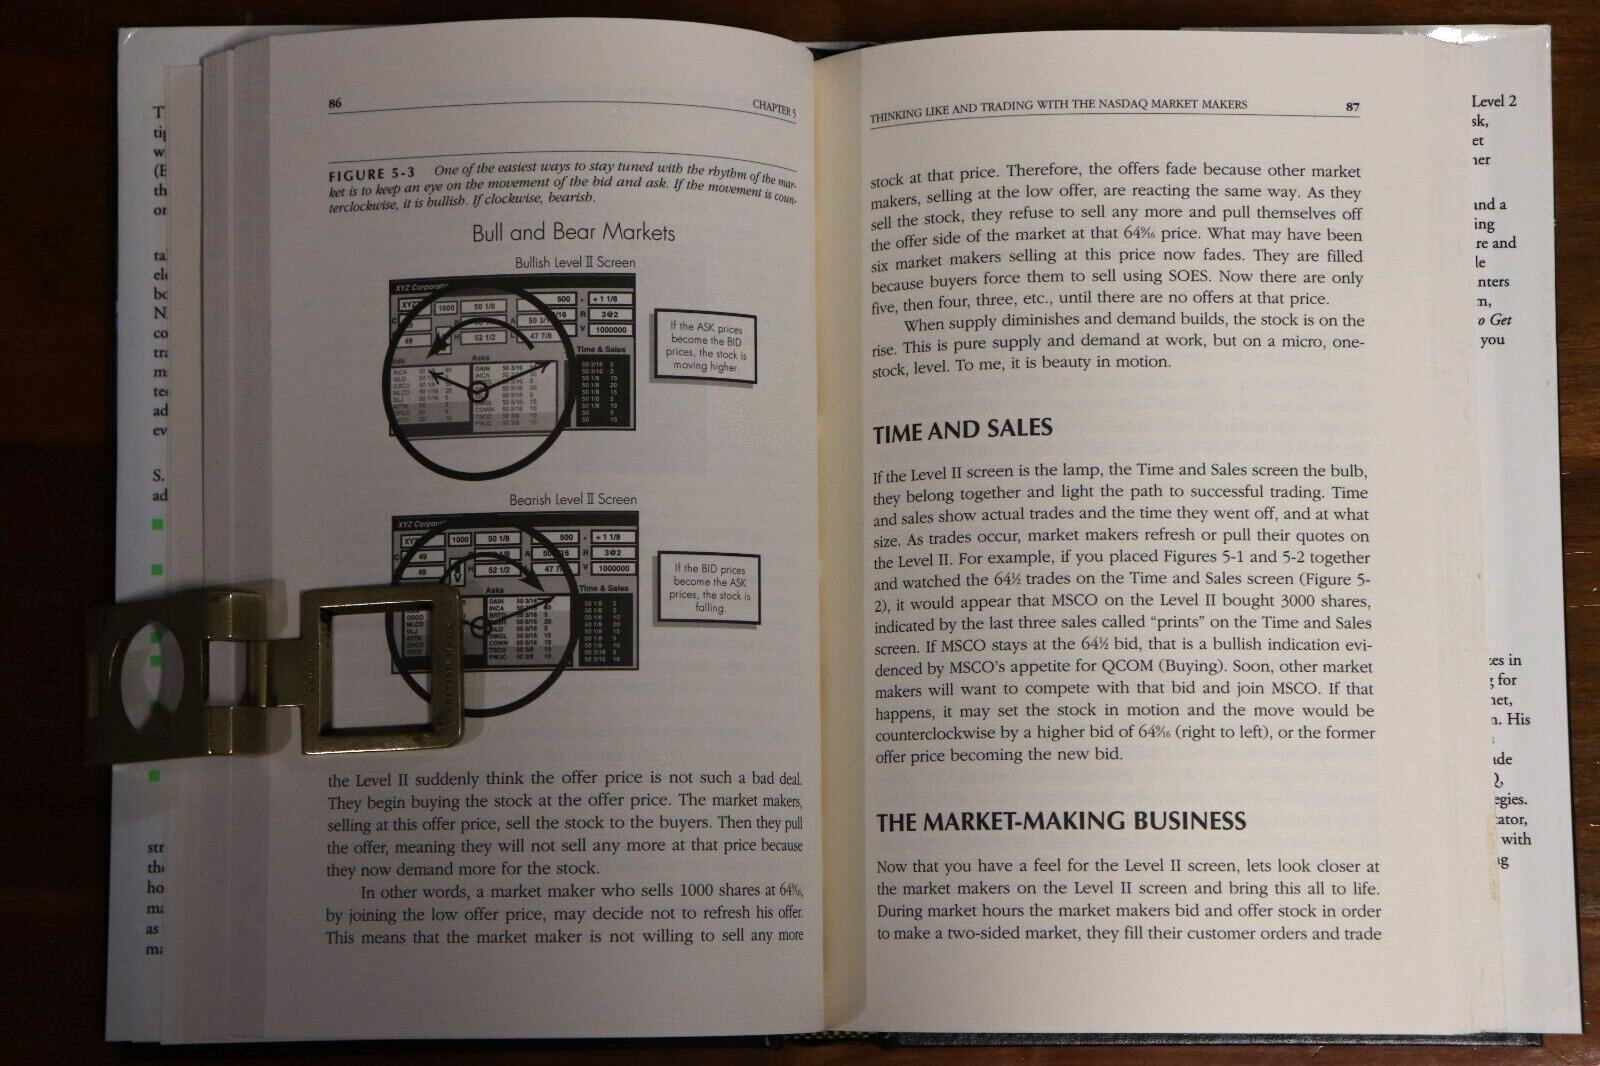 How To Get Started In Electronic Day Trading - 1999 - Stock Market Book